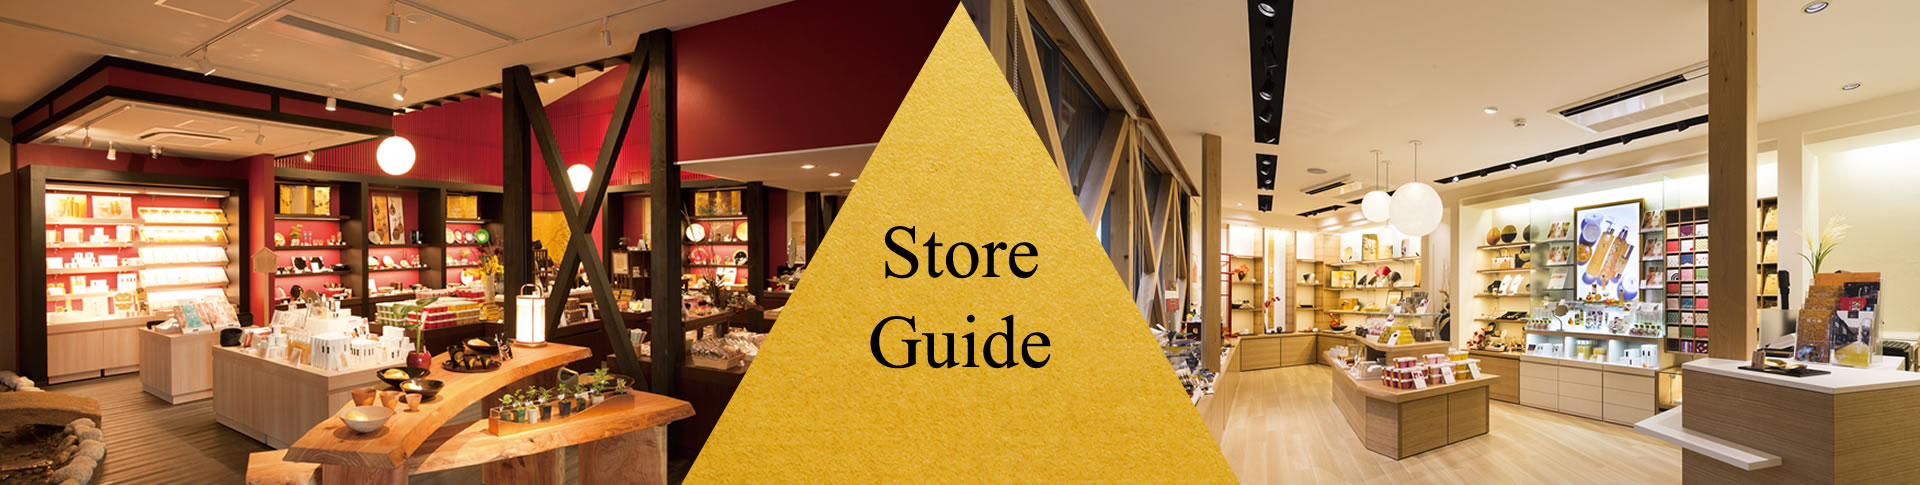 Store Guide